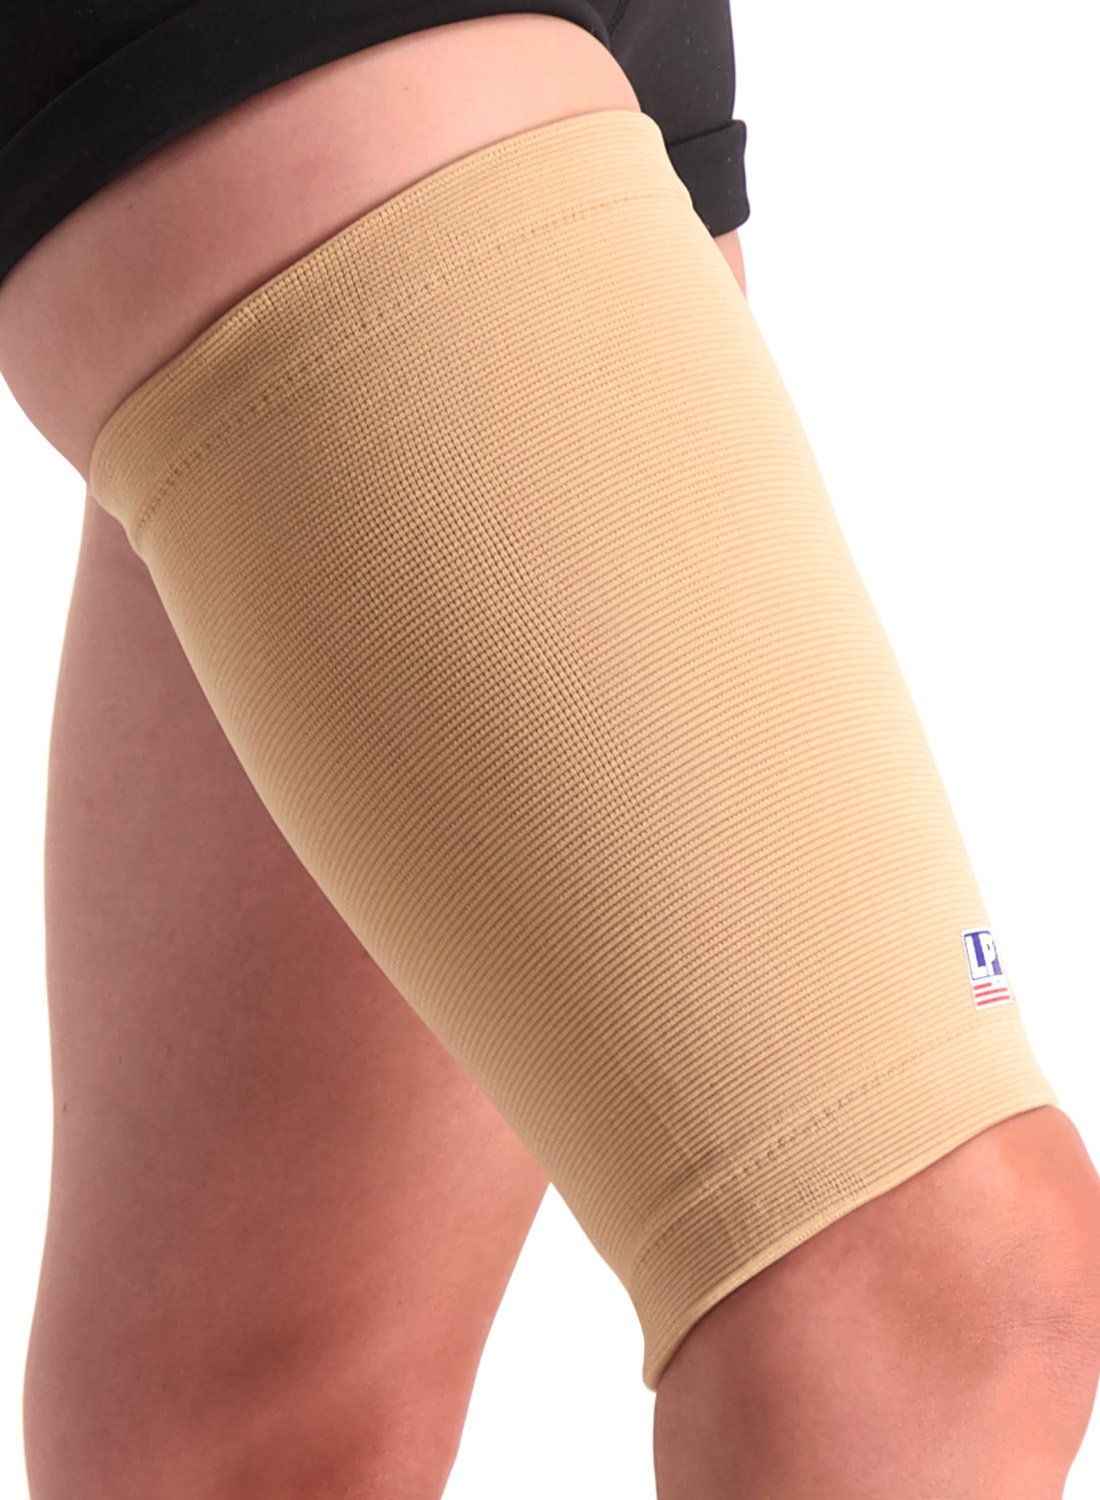 LP Support Thigh Support for sale